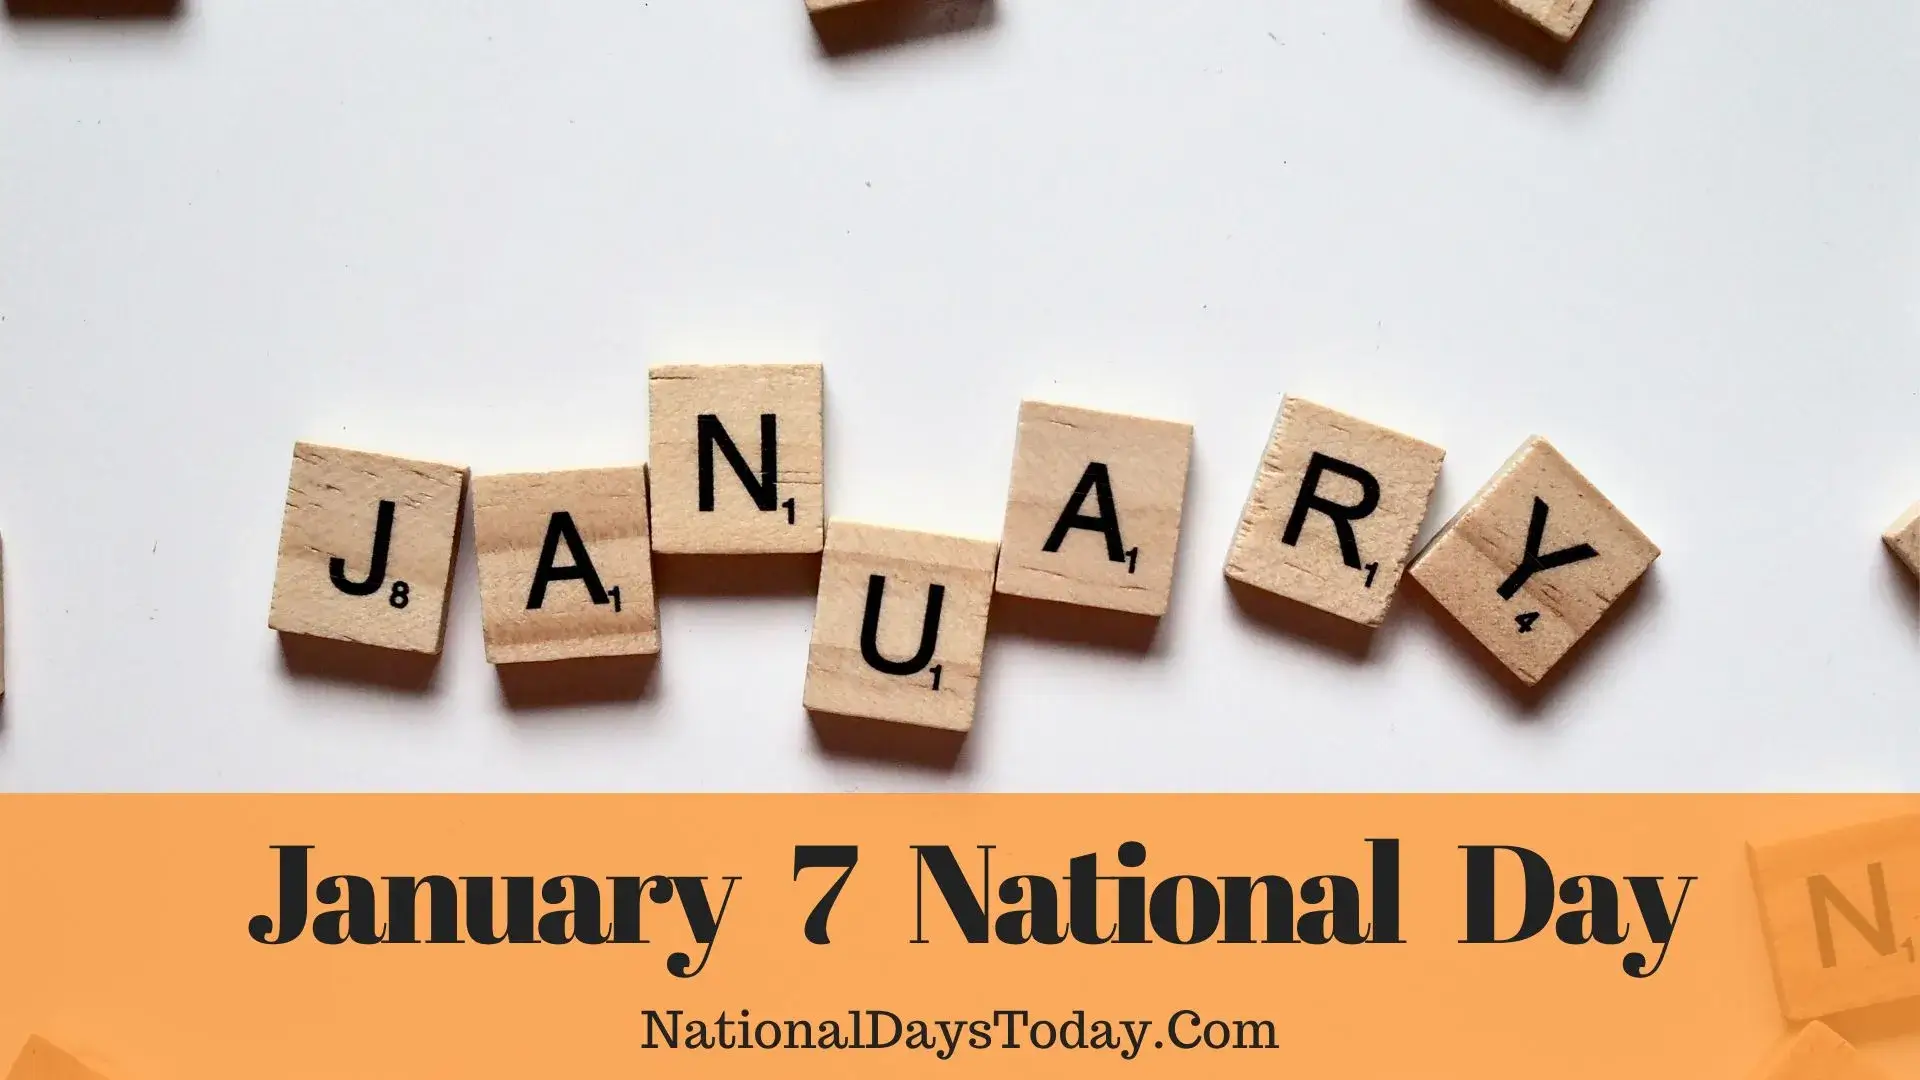 January 7 National Day